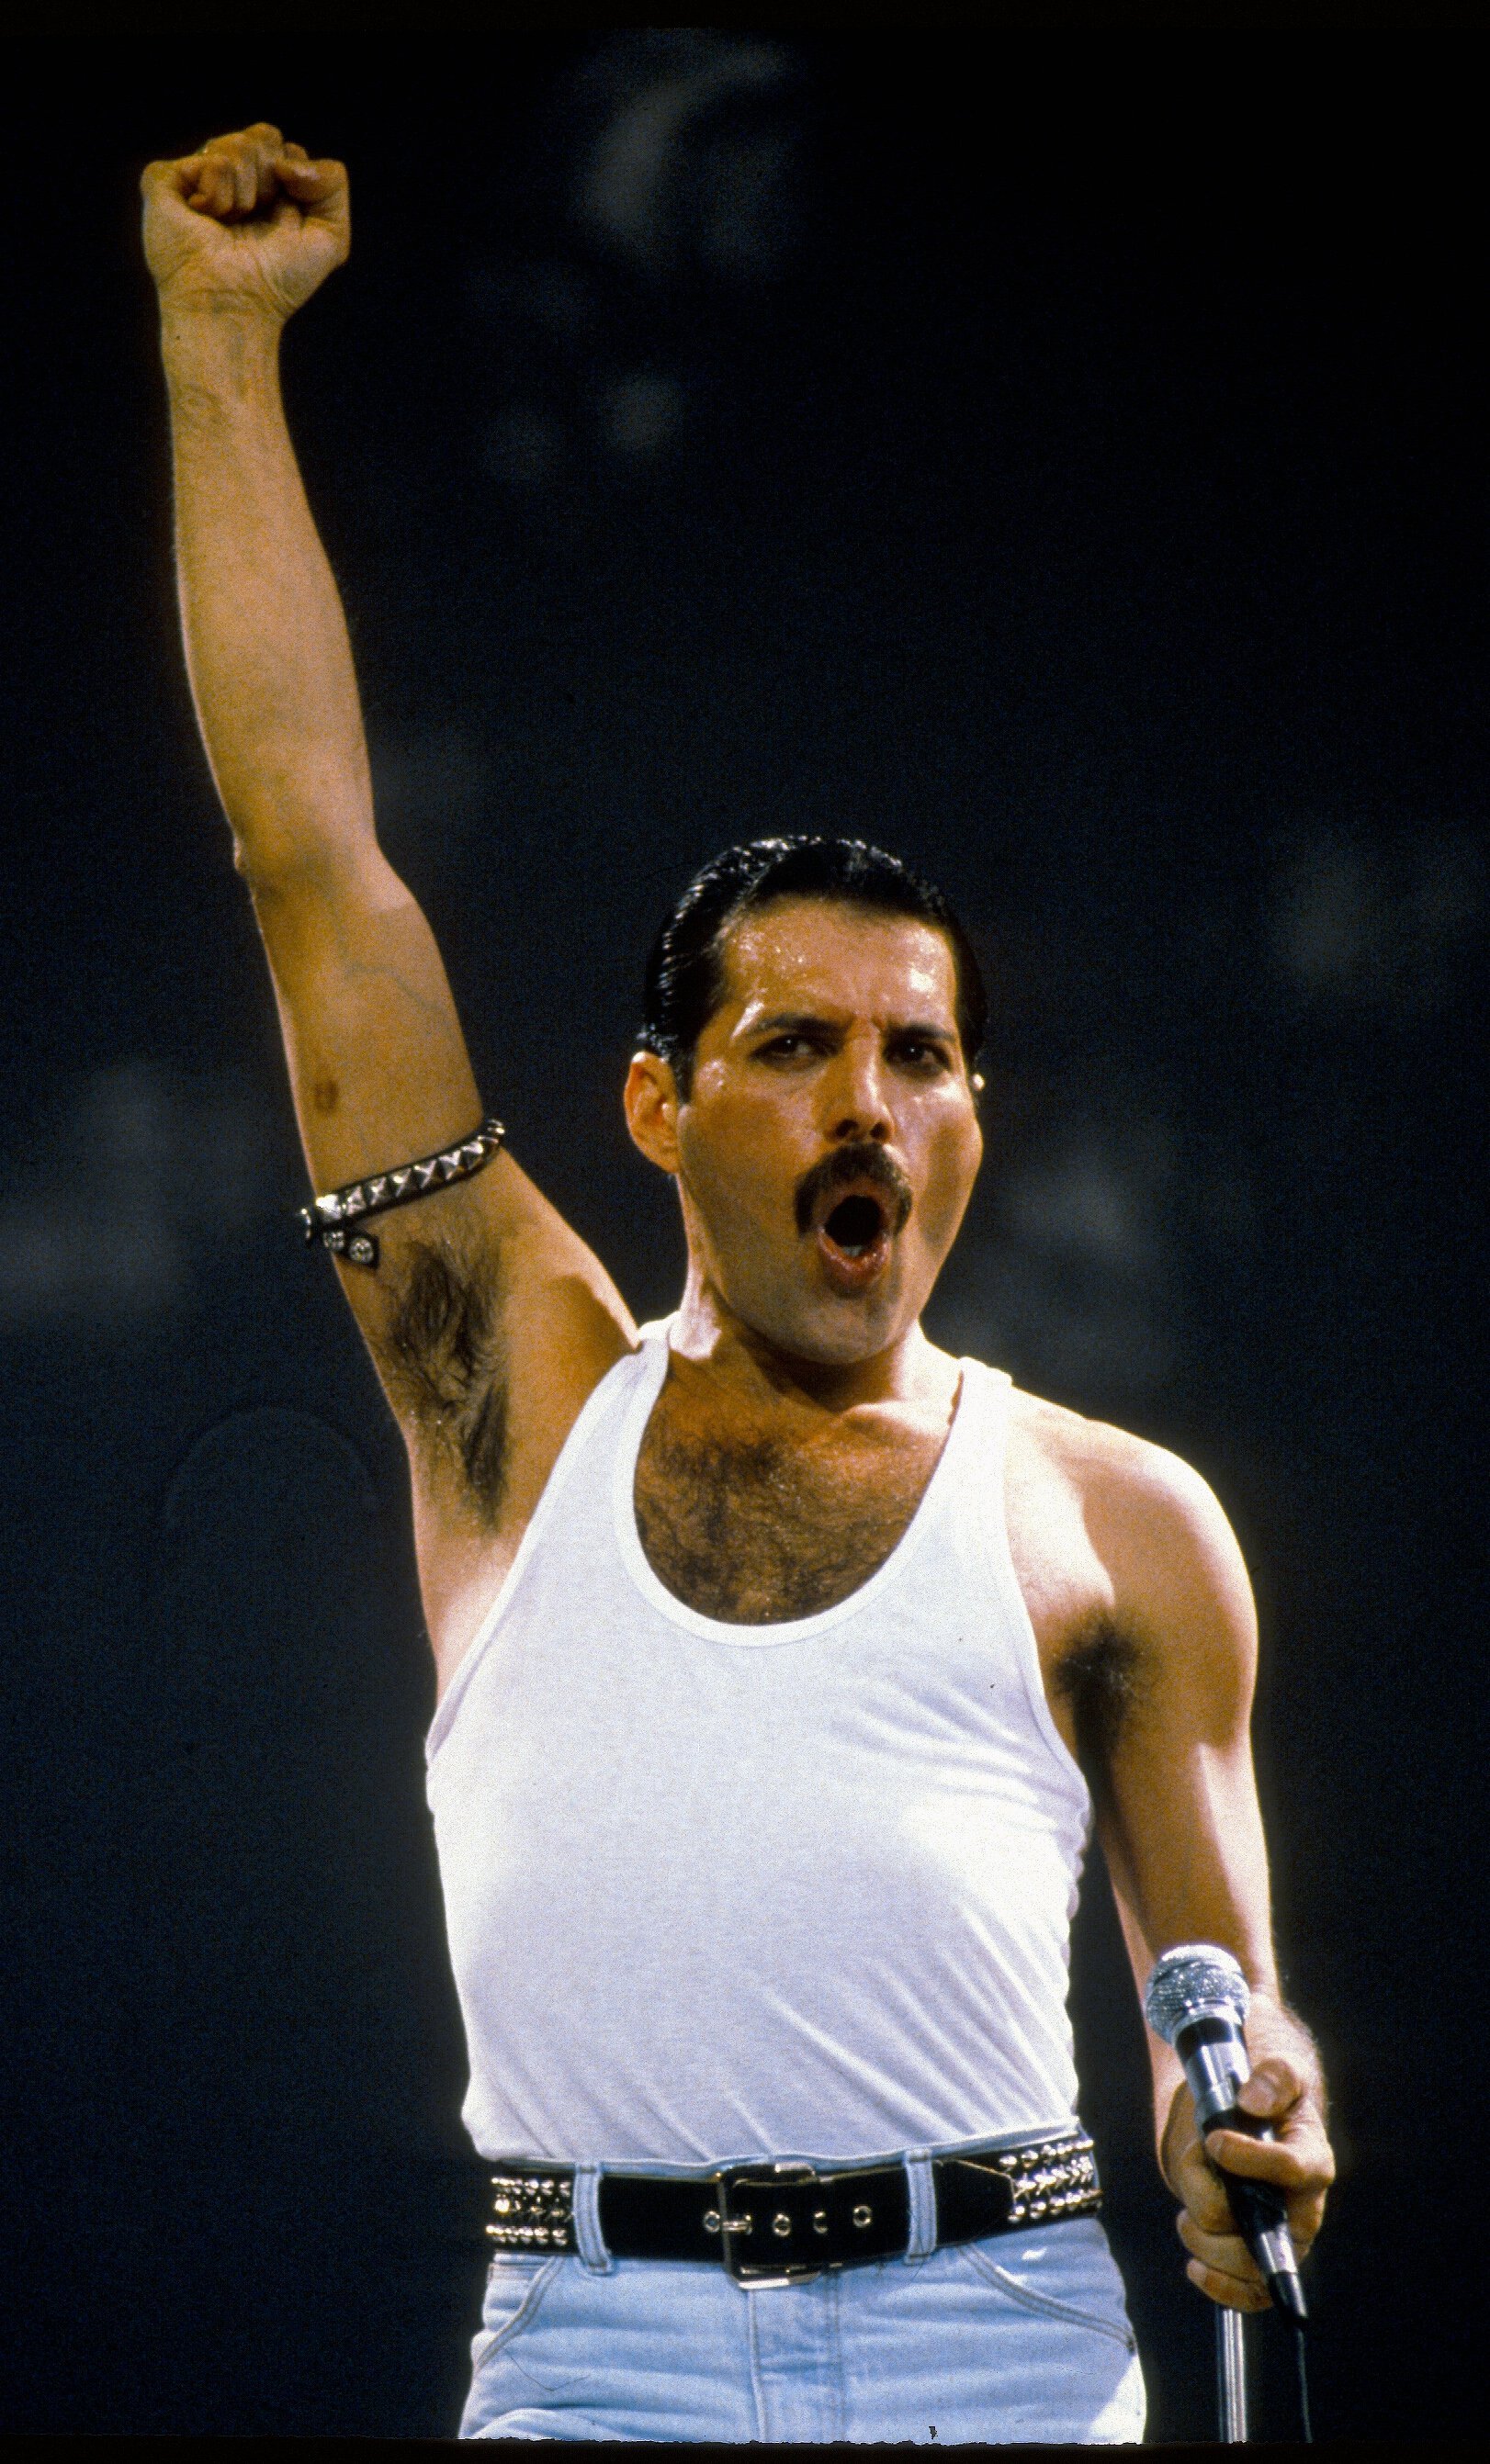 Freddie Mercury of the group Queen performs at the Live Aid concert on July 13, 1985 in London, England | Photo: Getty Images